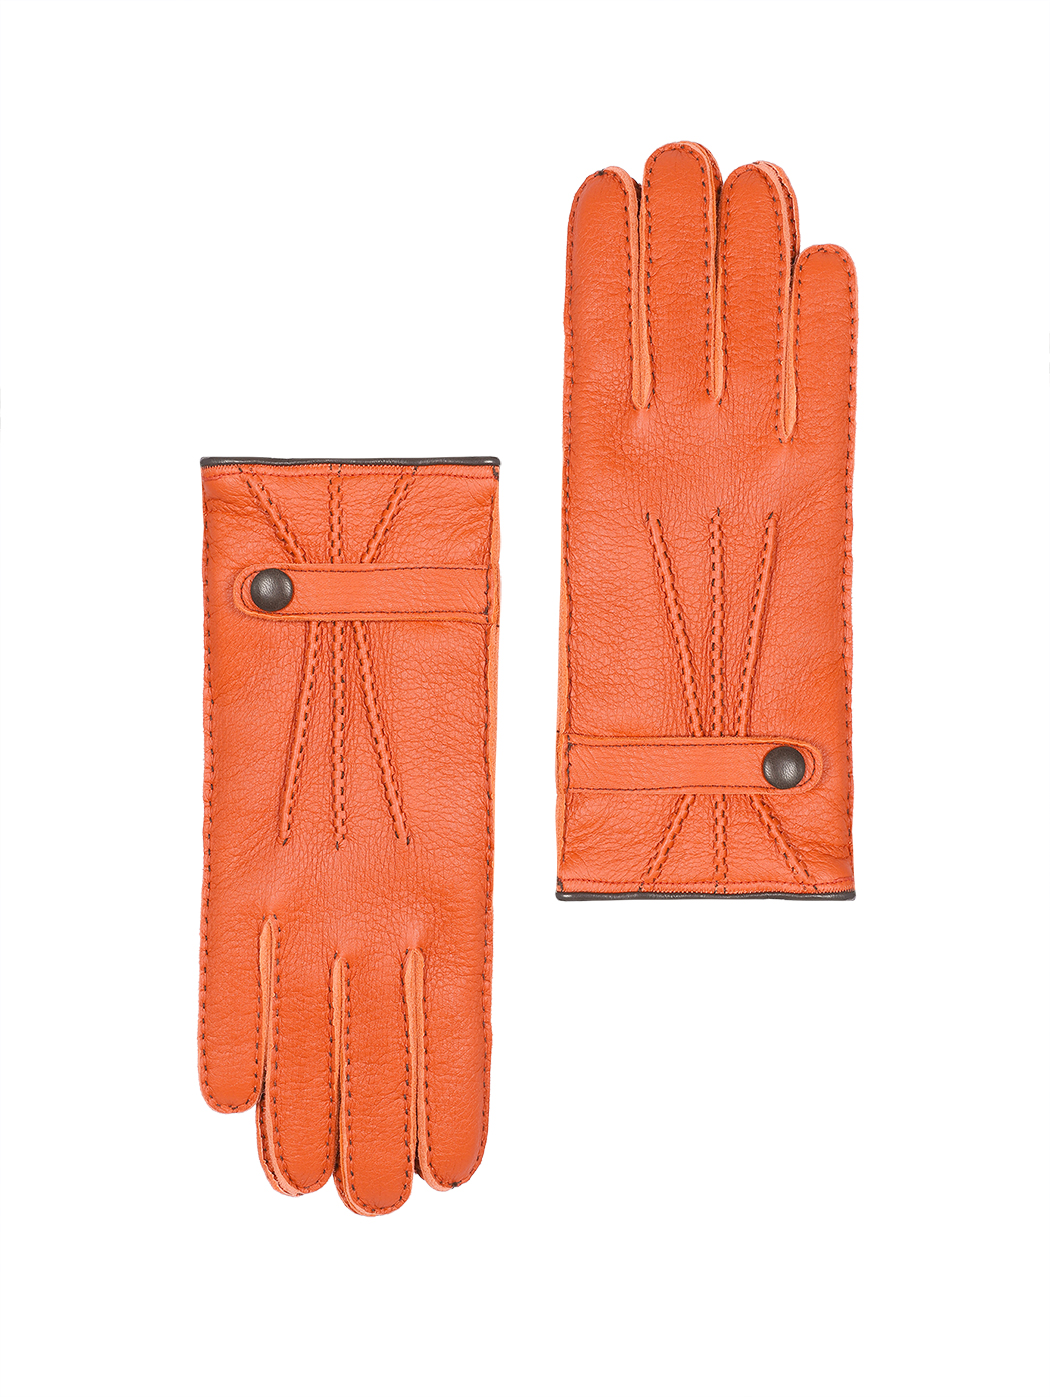 Women's two-tone leather gloves